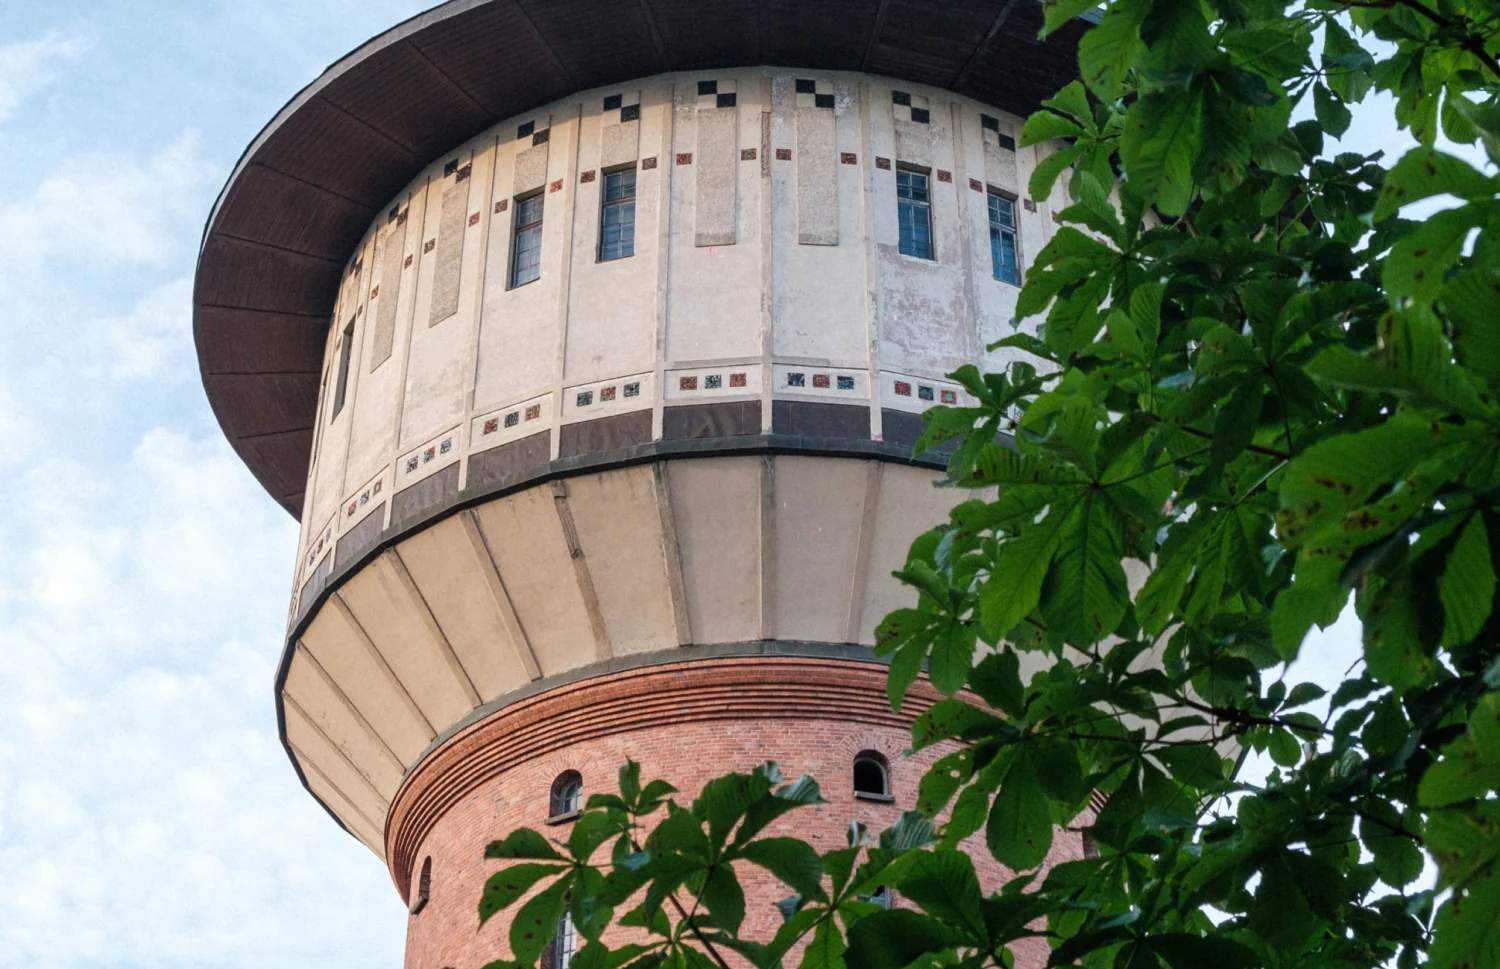 Revisiting Industrial Heritage: Water Towers